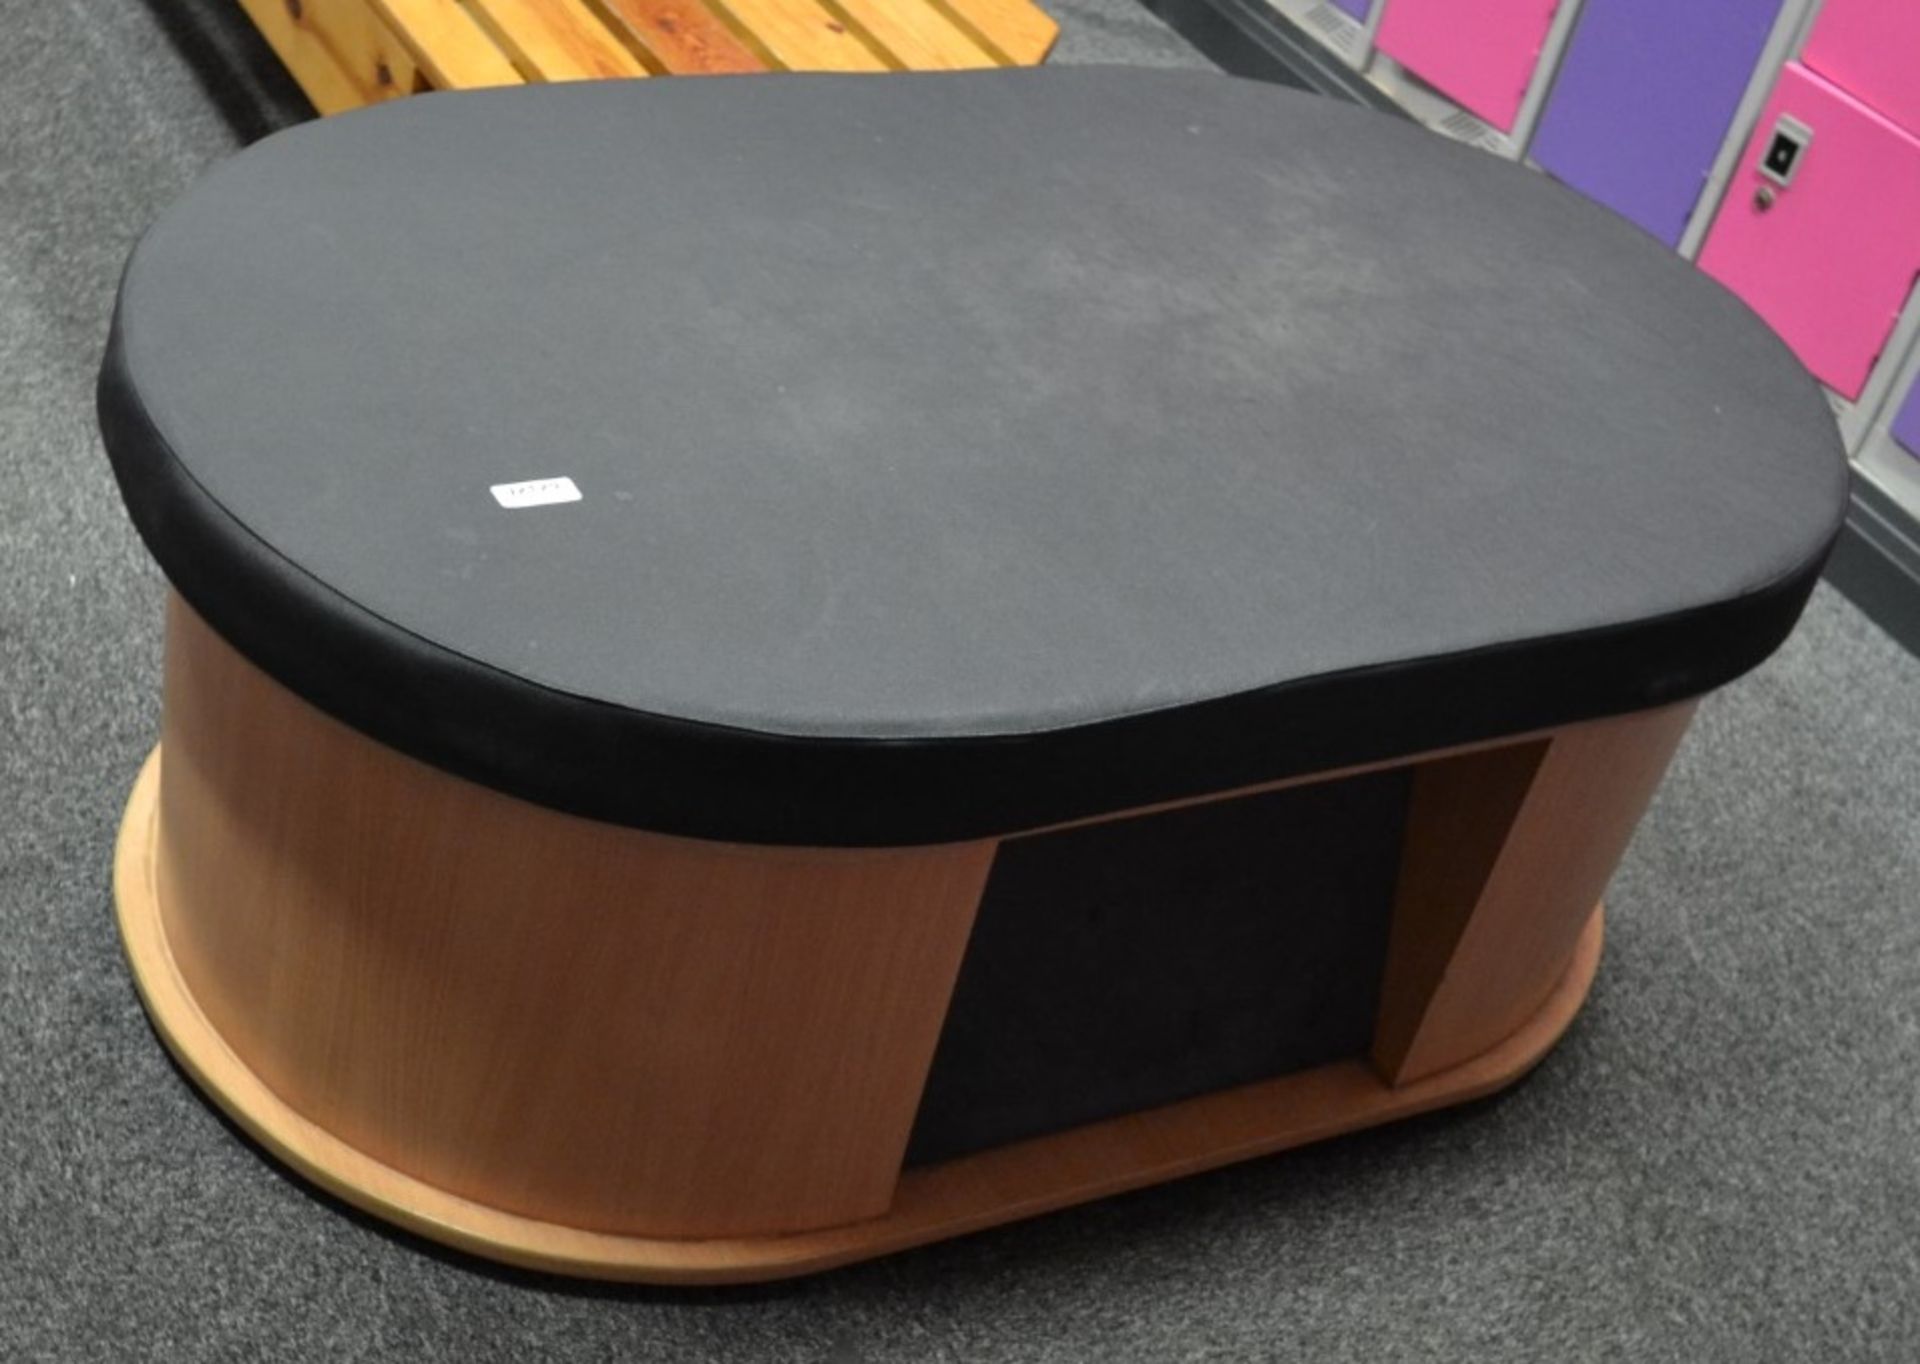 1 x Oval Changing Room Bench With Padded Top - Dimensions: L130 x W80 x H50cm - Ref: J2131/MCR